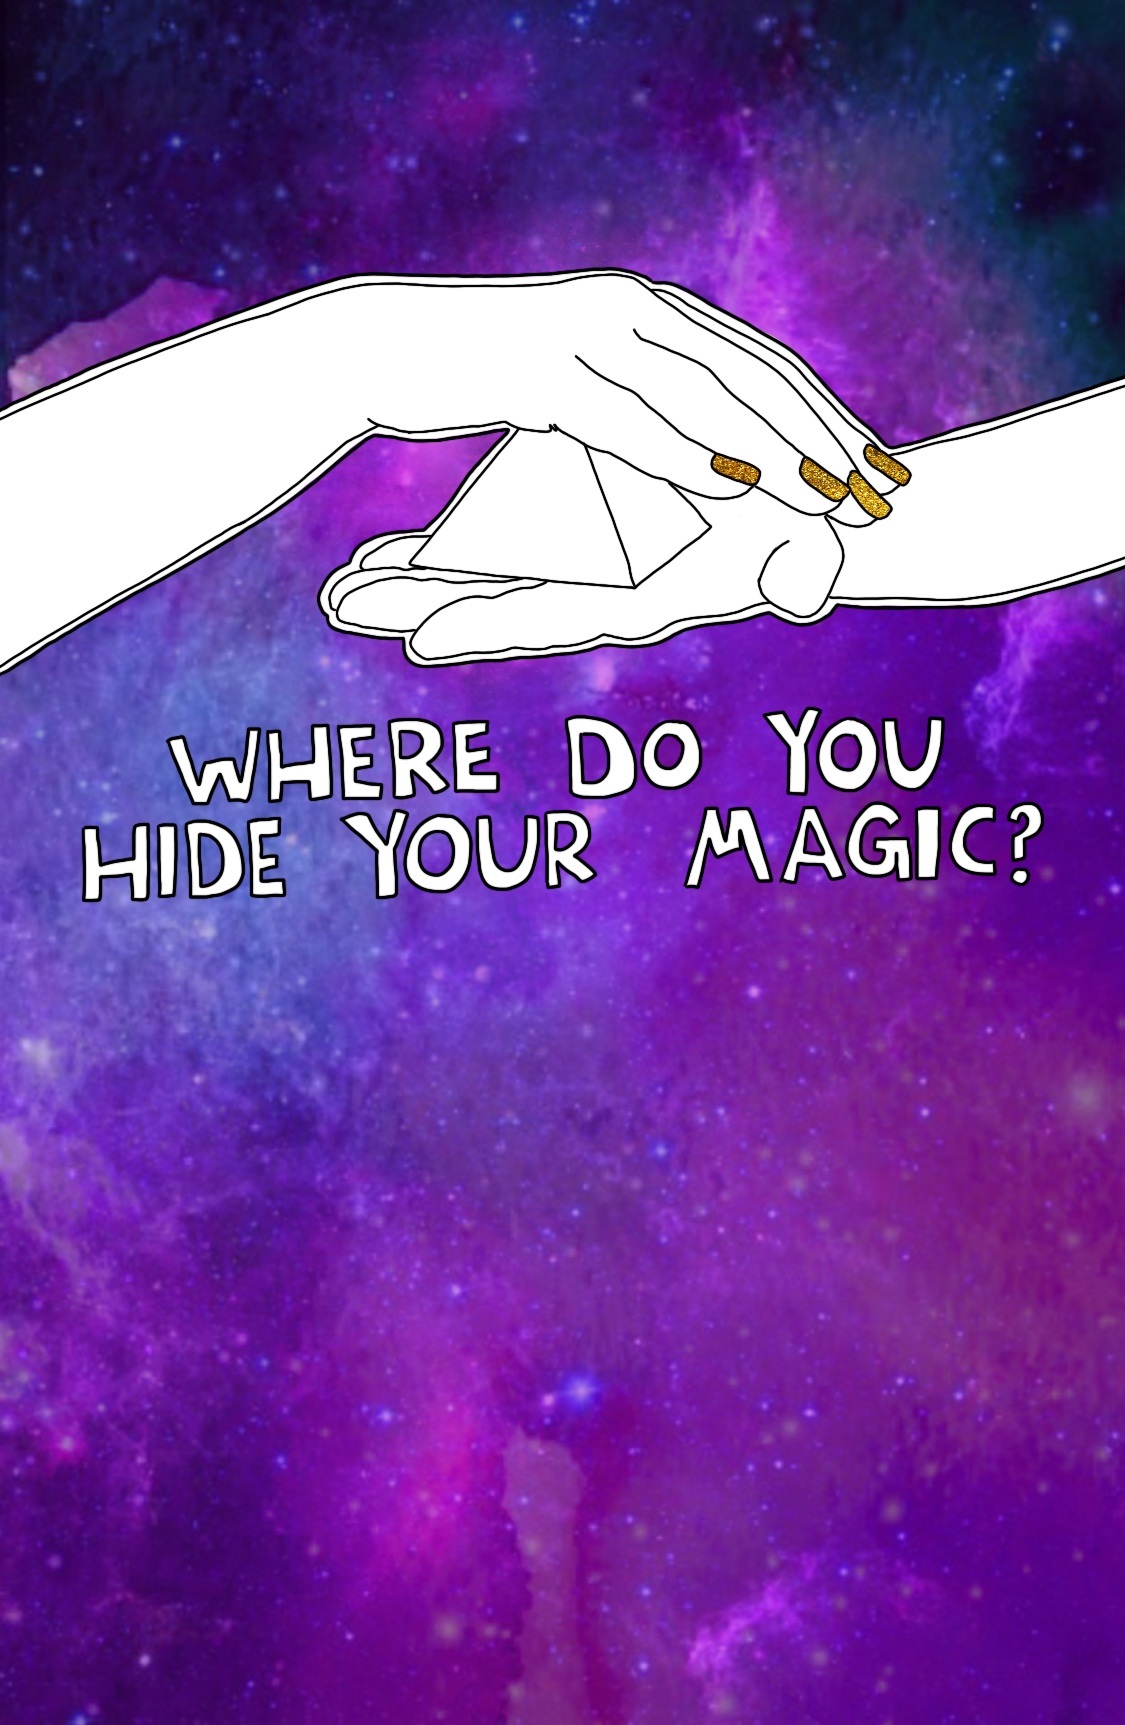 Journal Prompt: Where do you hide your magic?